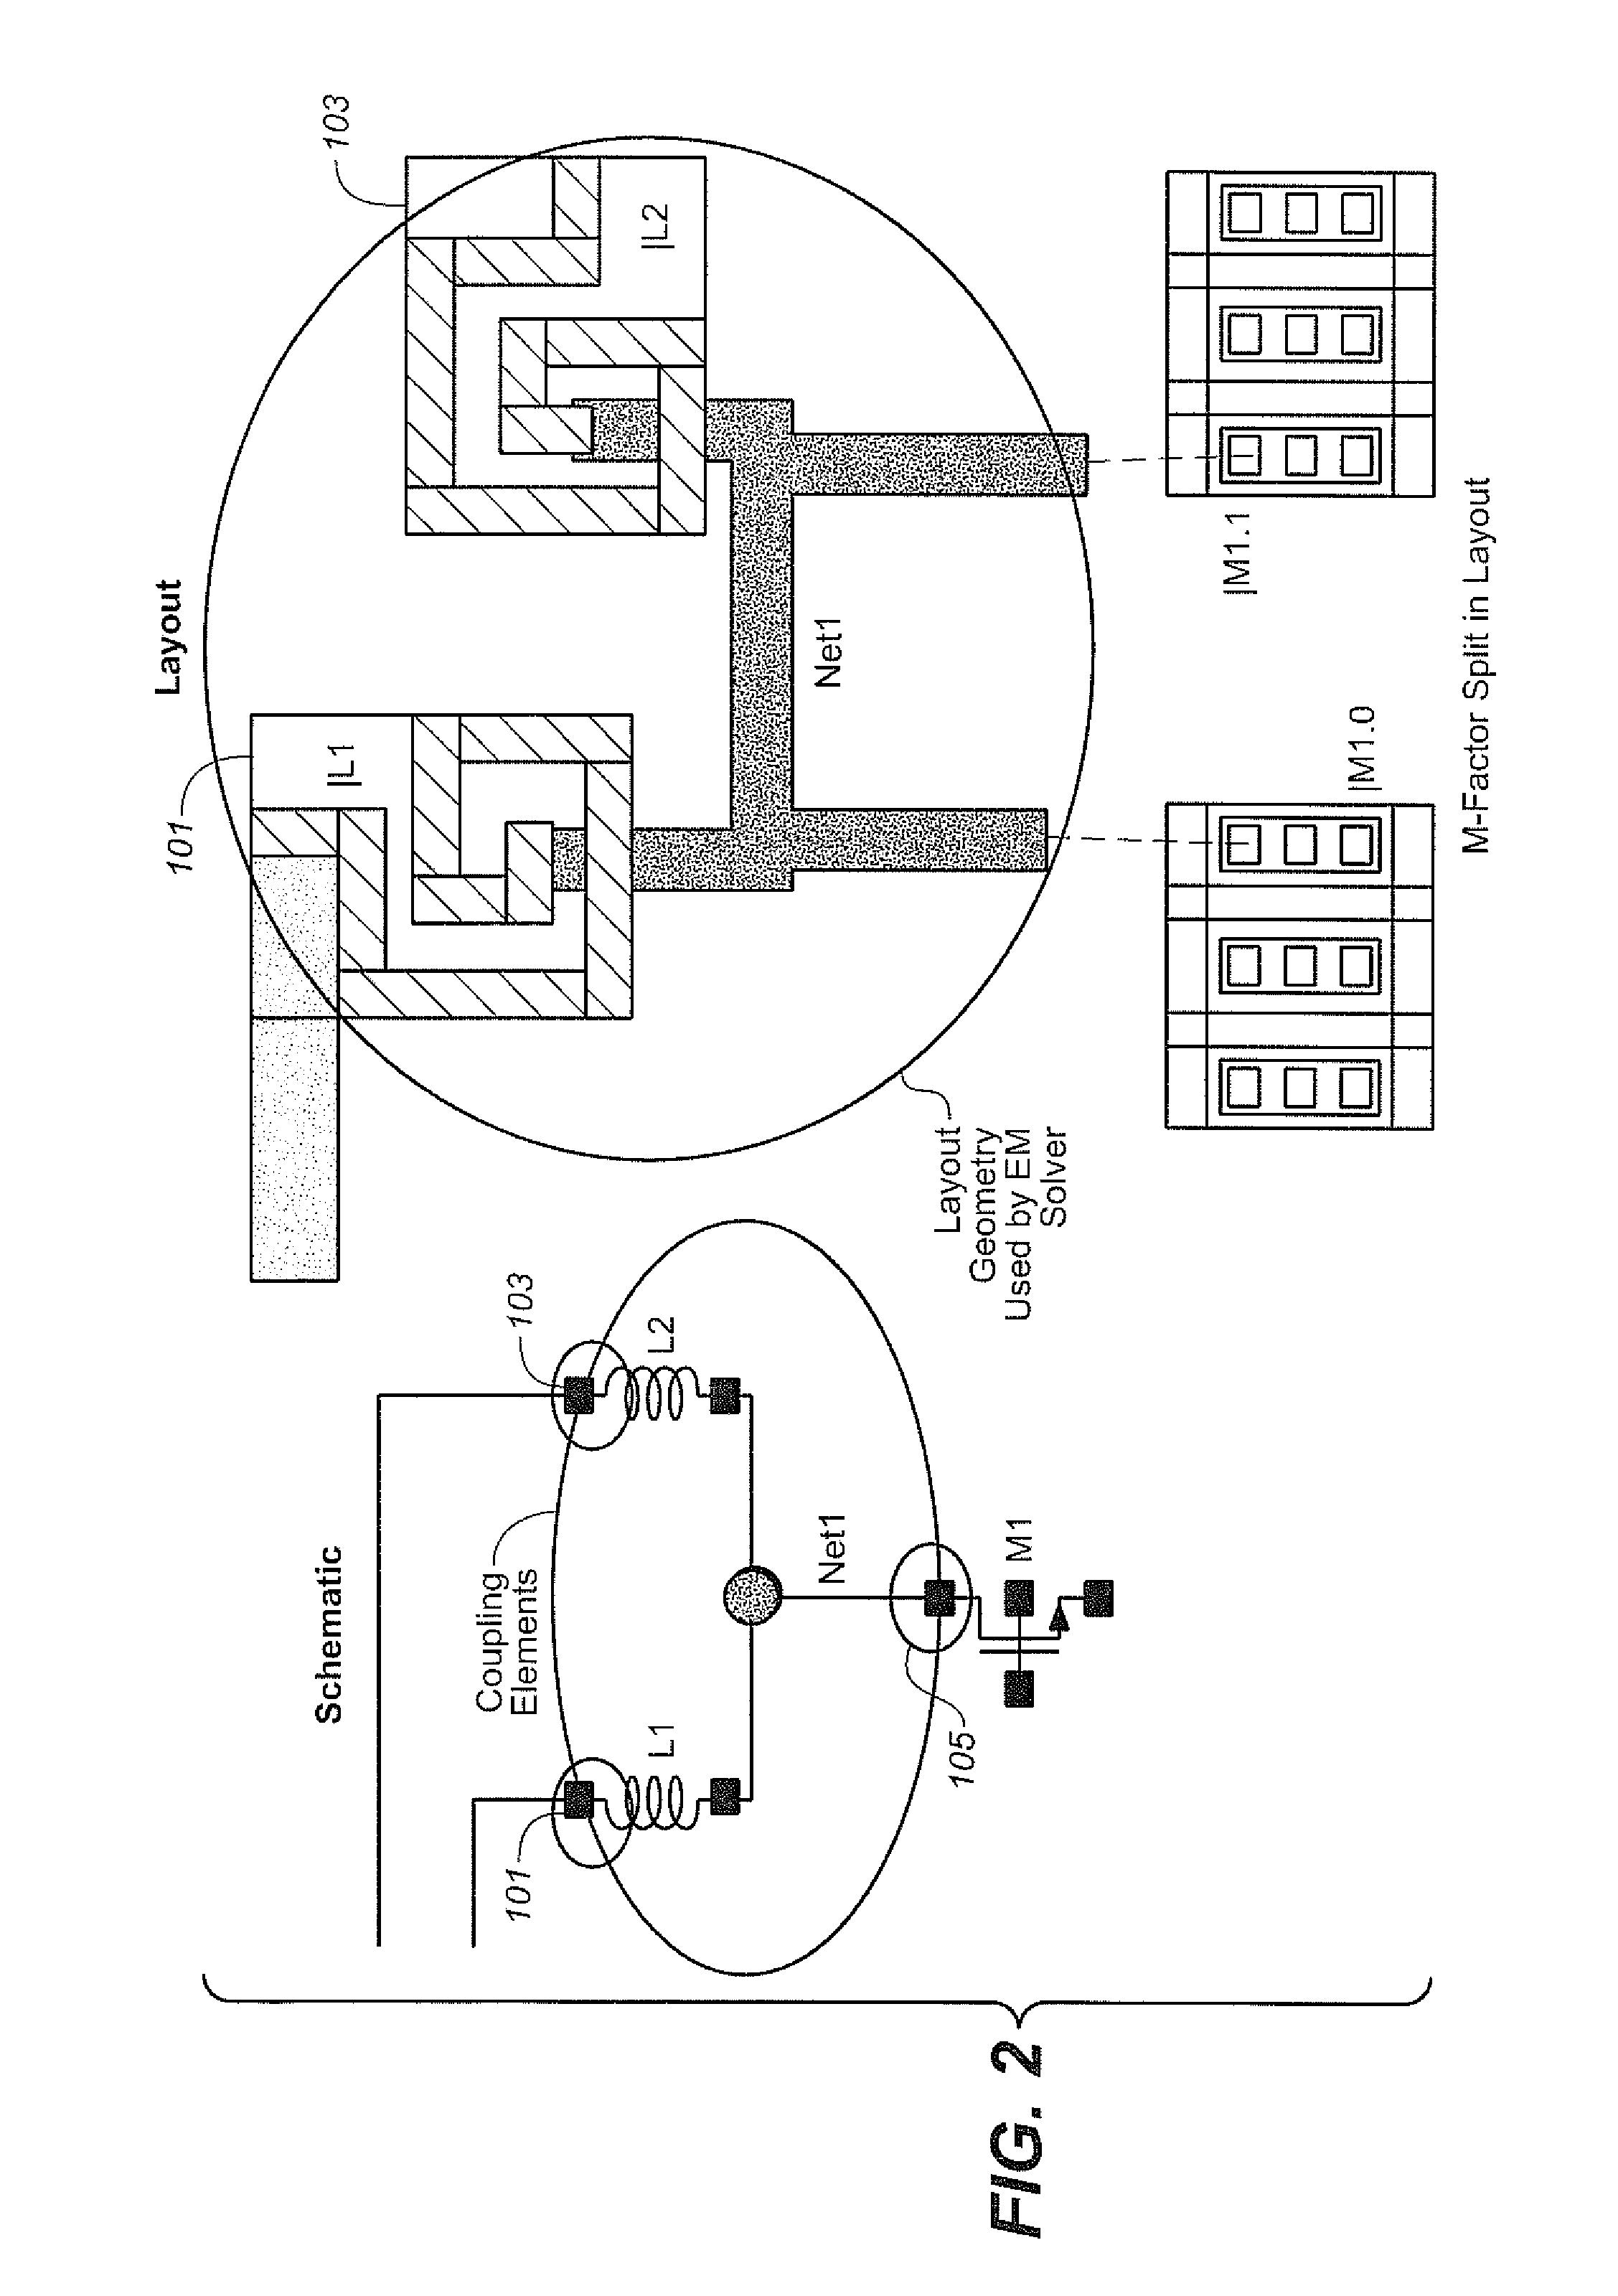 Technique for modeling parasitics from layout during circuit design and for parasitic aware circuit design using modes of varying accuracy